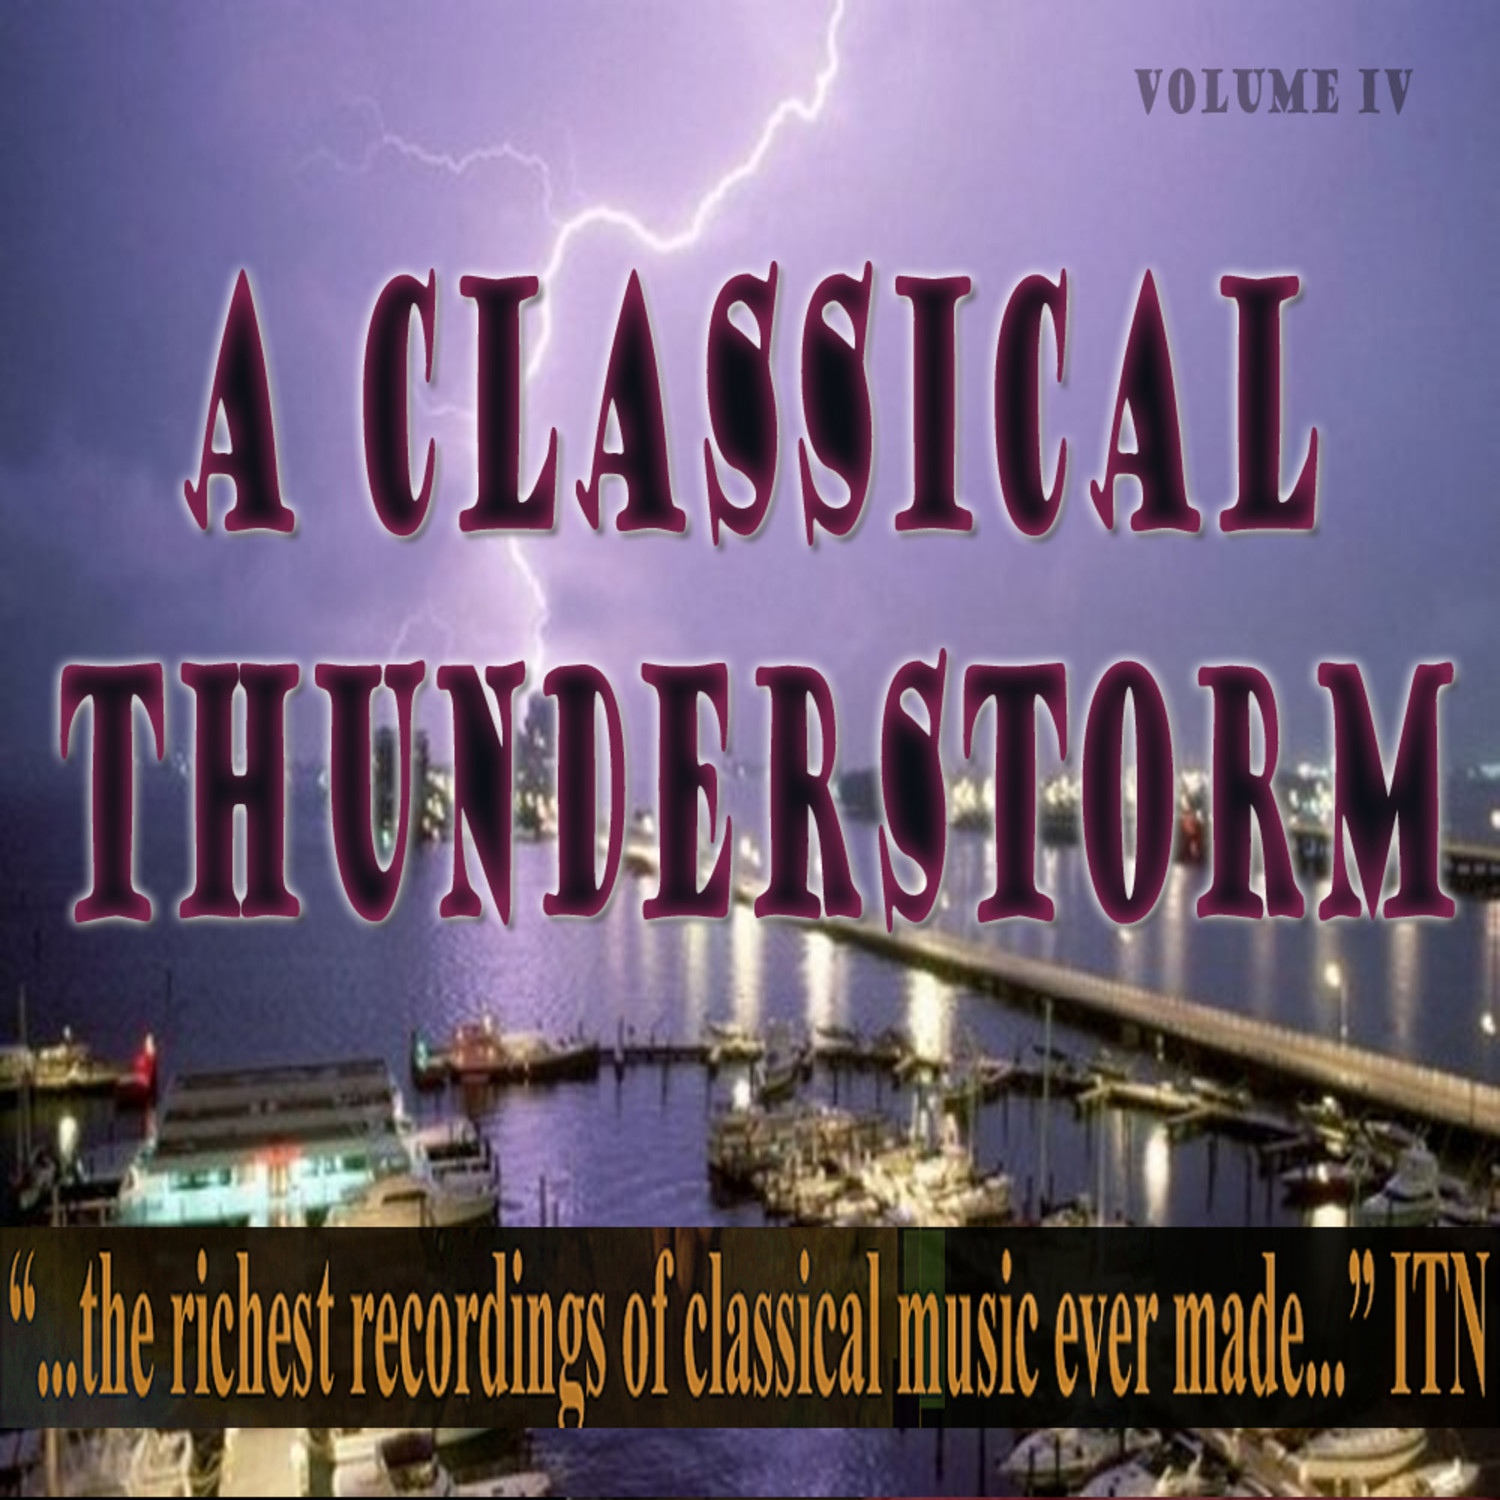 A Classical Thunderstorm Volume IV